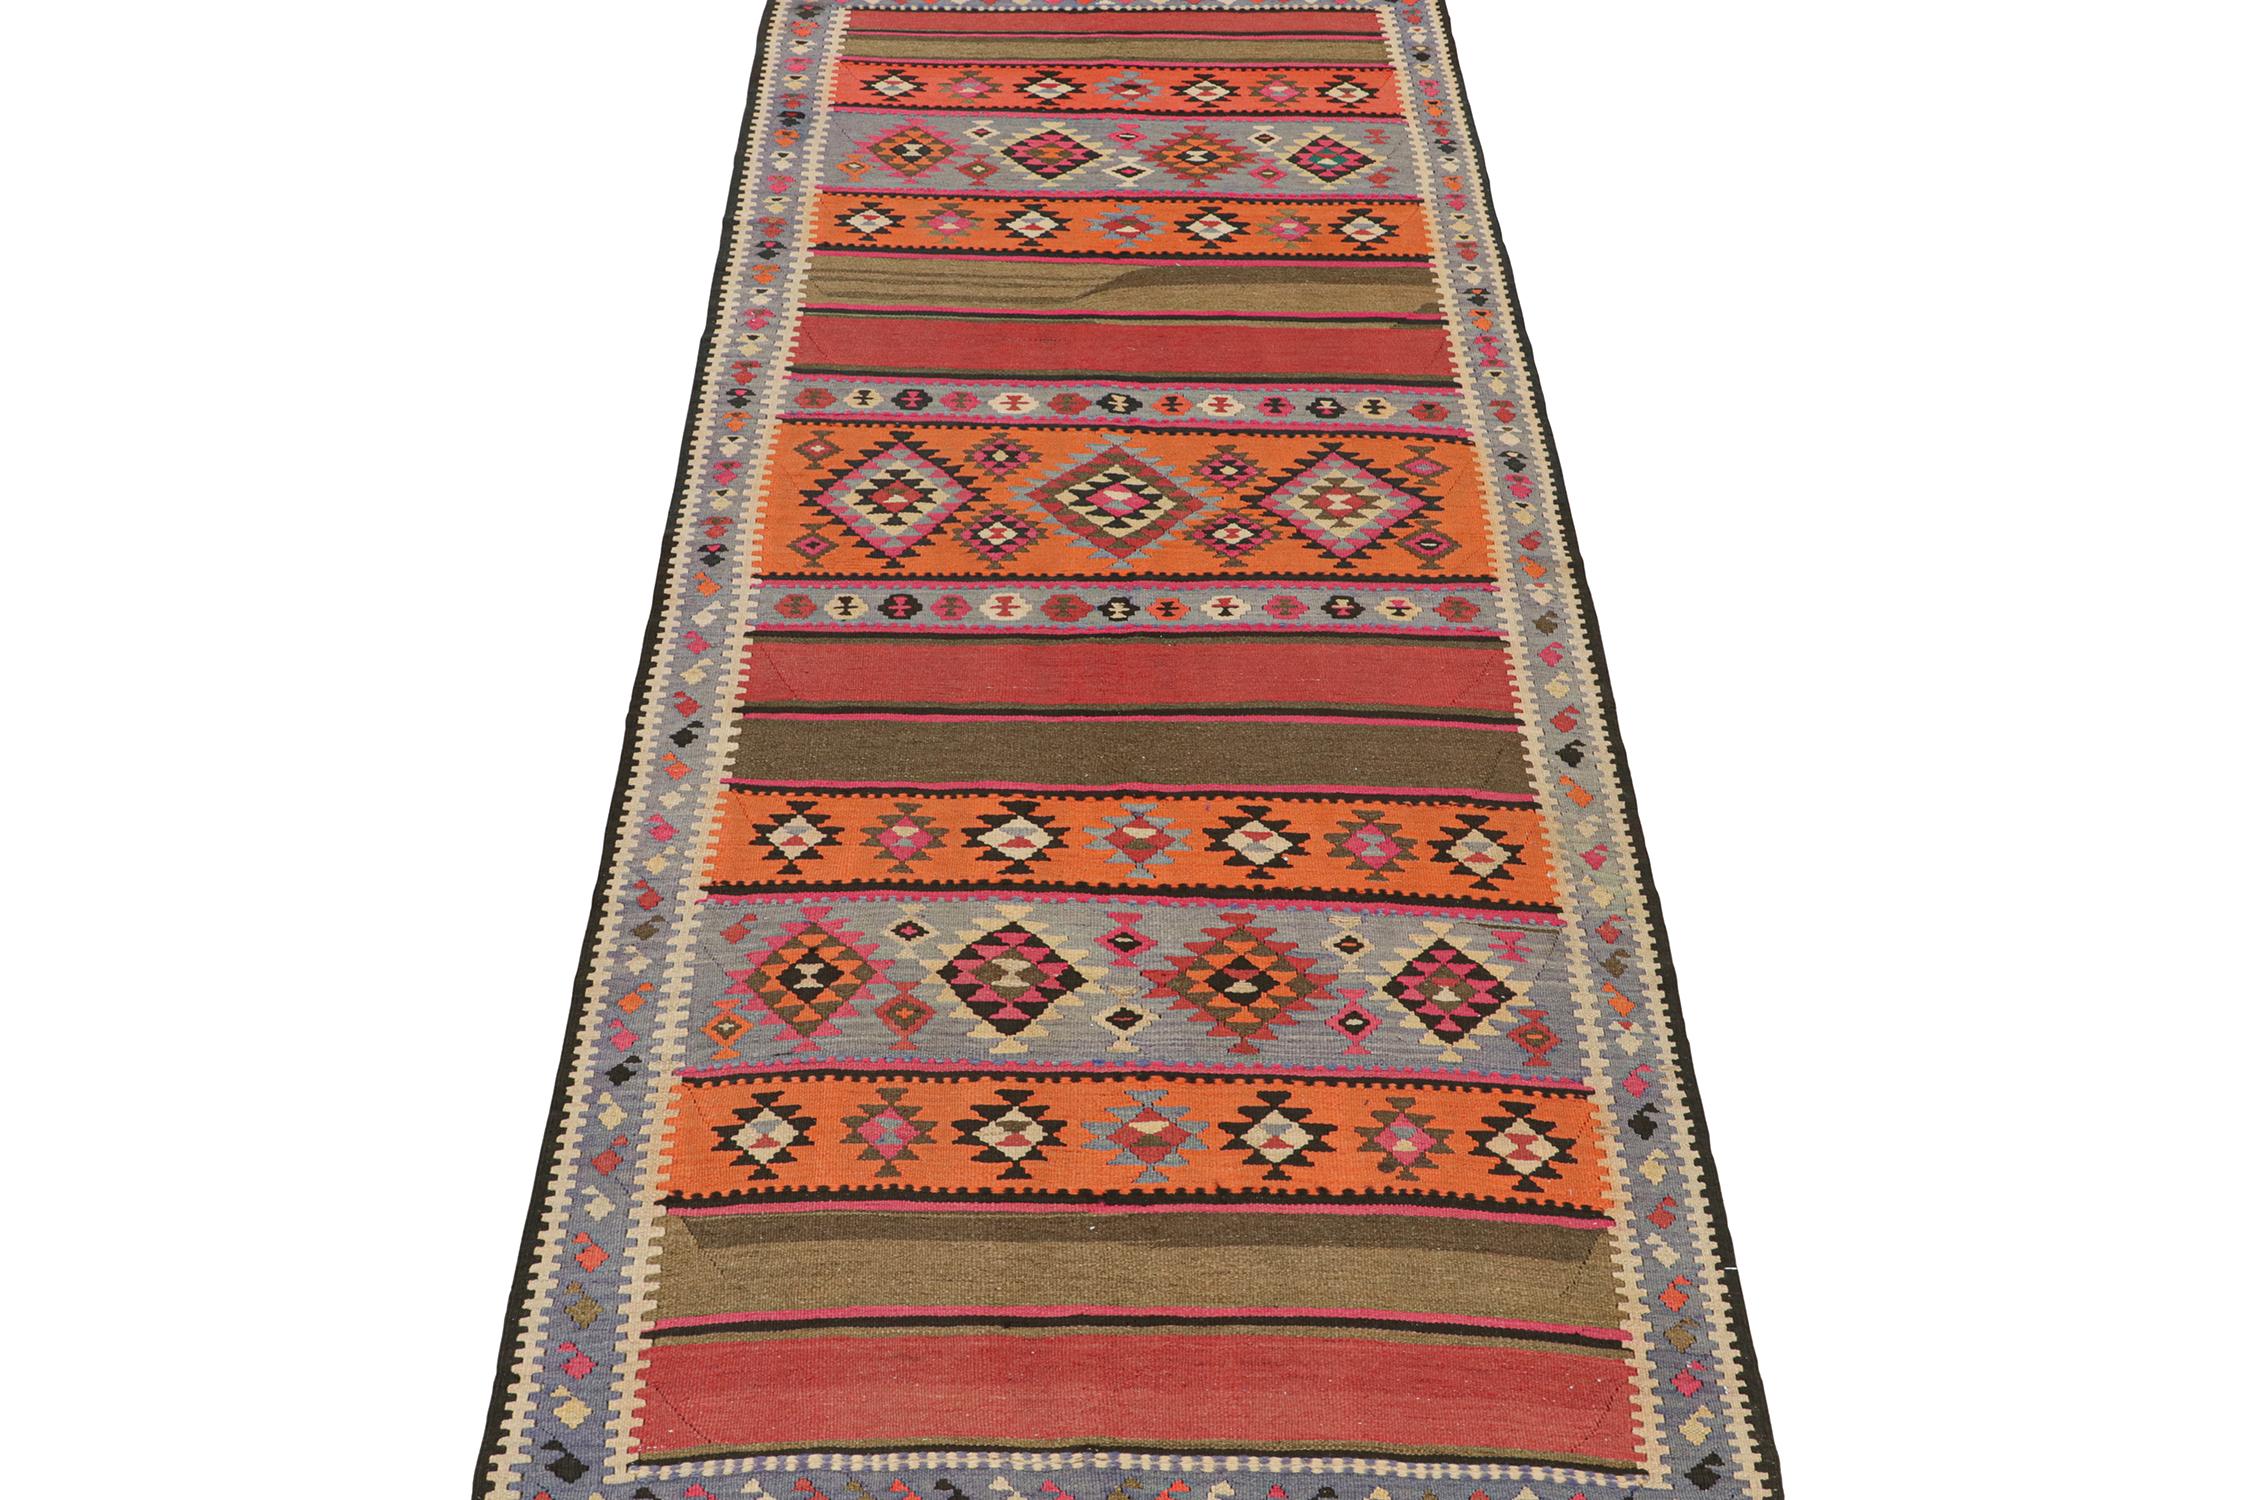 This vintage 5x13 Persian Kilim is a tribal rug we believe hails from Meshkin—an Iranian village known for its craft. Handwoven in wool, it originates circa 1950-1960.

The design favors vibrant colors in a polychromatic colorway with very